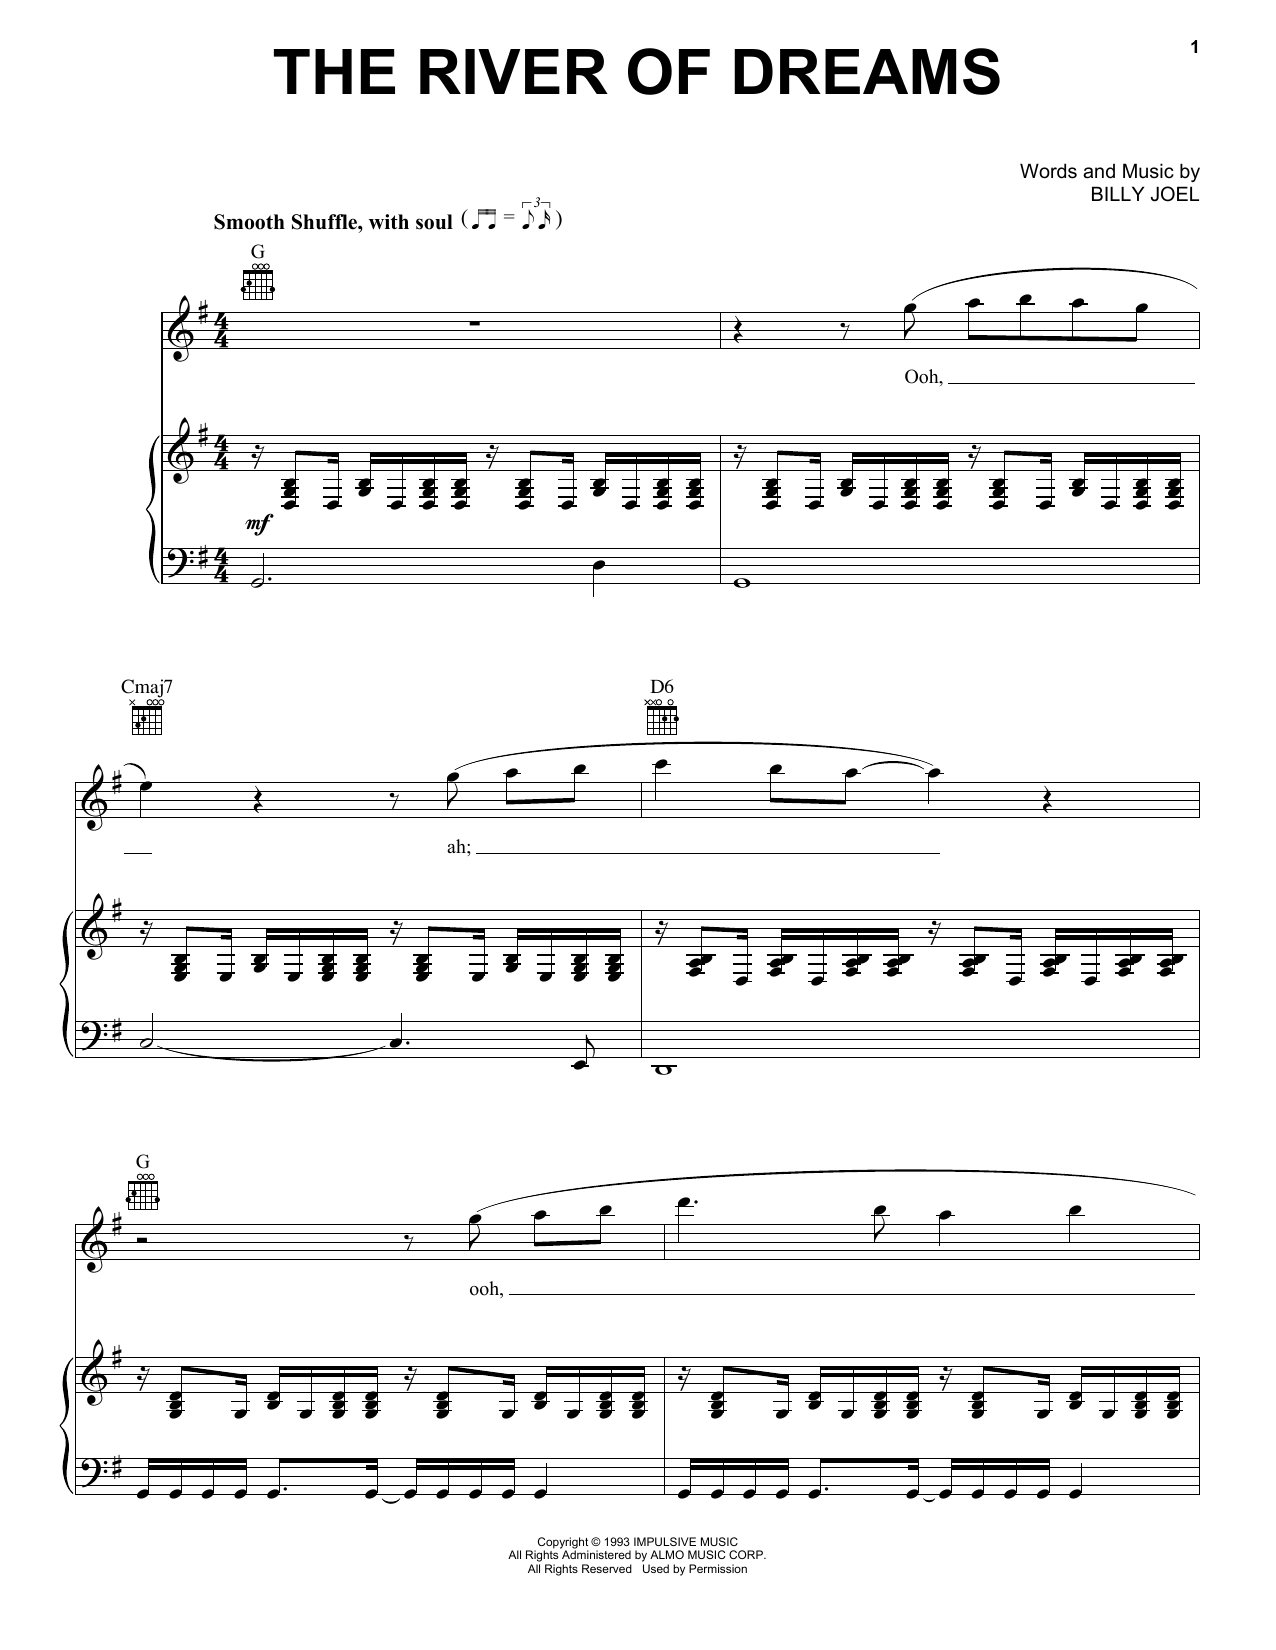 Billy Joel The River Of Dreams sheet music notes and chords. Download Printable PDF.